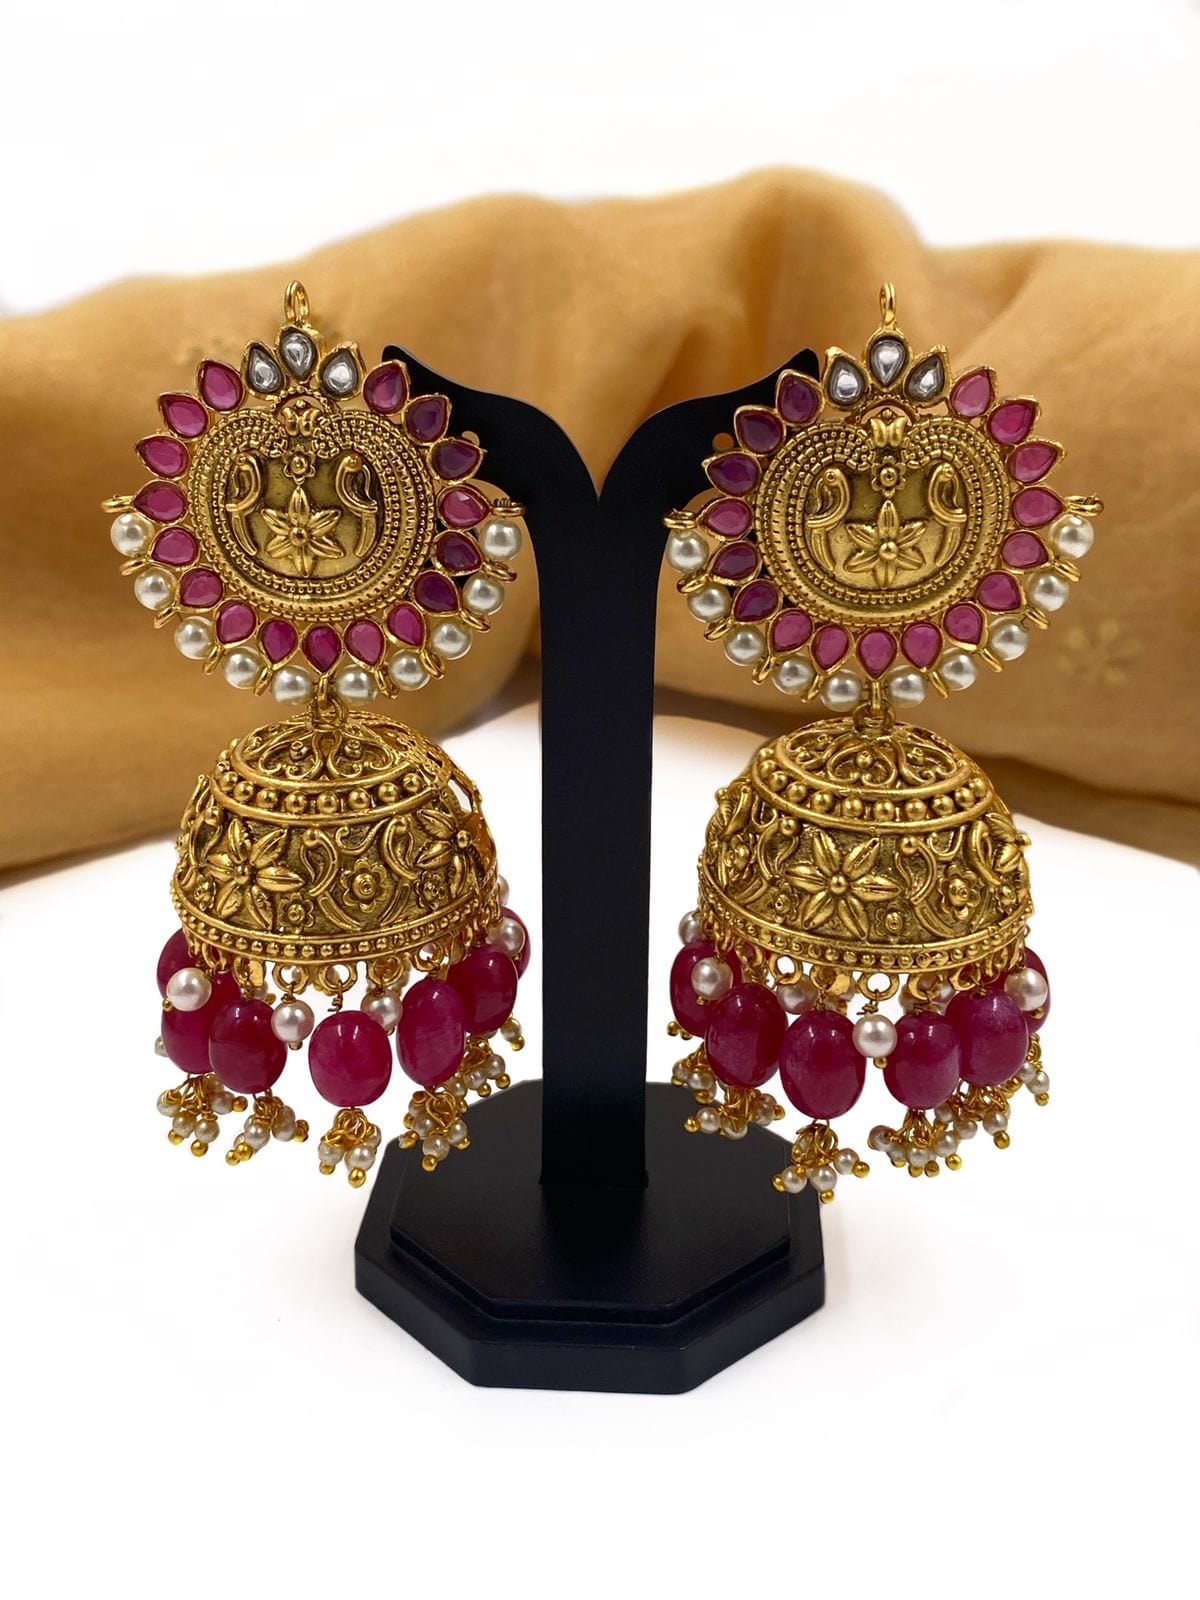 Traditional Gold Plated Exclusive Golden Jhumka For Ladies By Gehna Shop Jhumka earrings